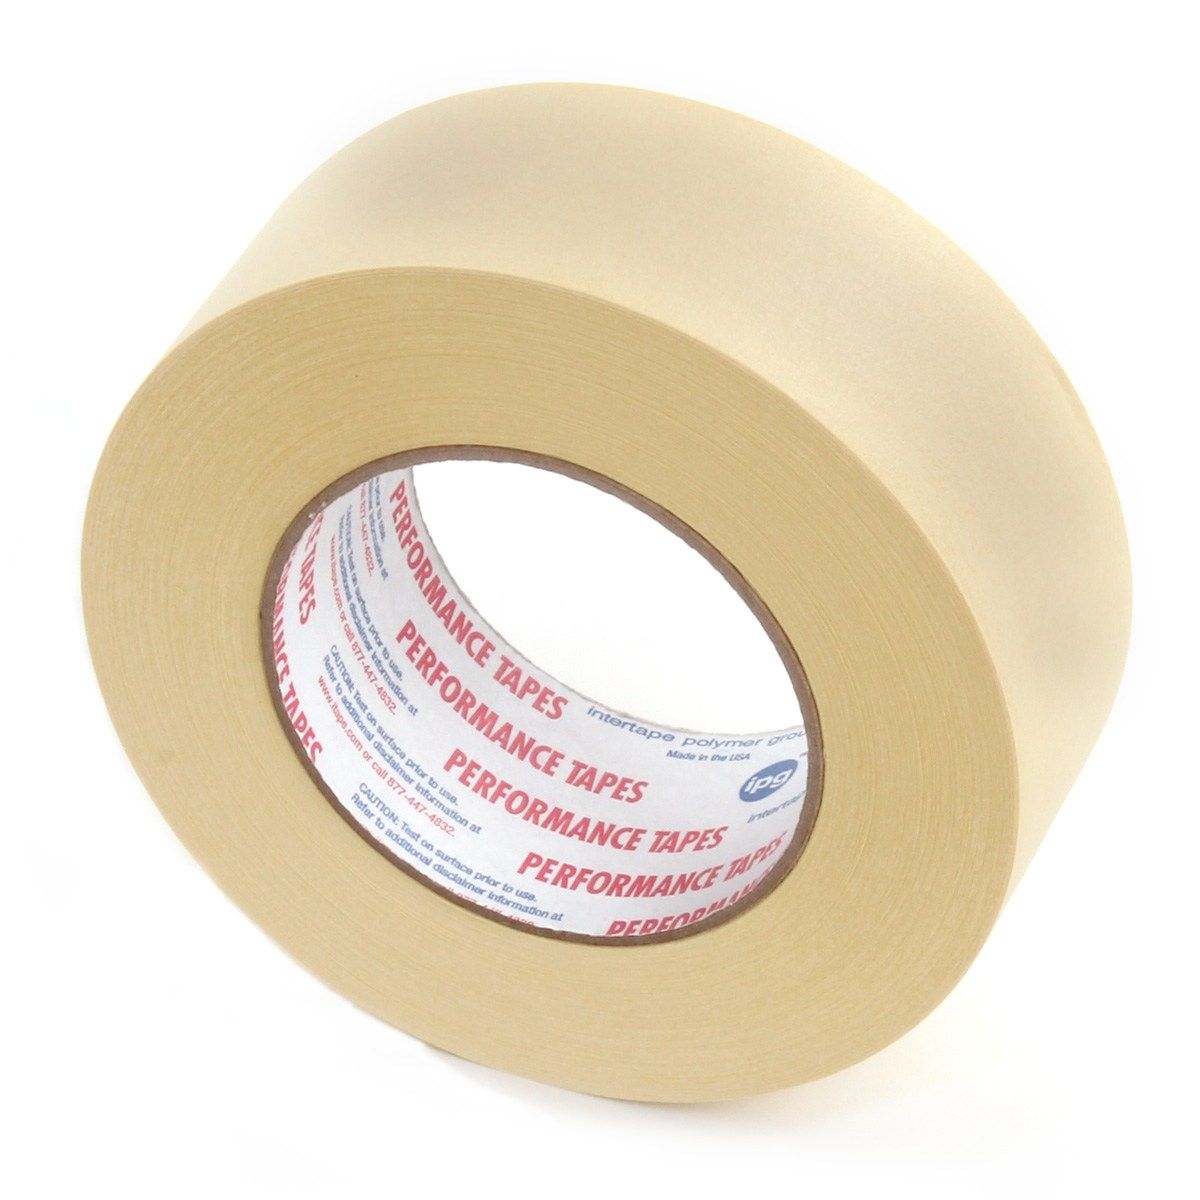  2 Rolls Duct Tape Carpet Sticky Tape Painters Tape 1 Inch Wide  High Temperature Tape Insulation Adhesive Metal Tape Tape Convenient  Sealing Tape Floor Dryer Paper : Office Products